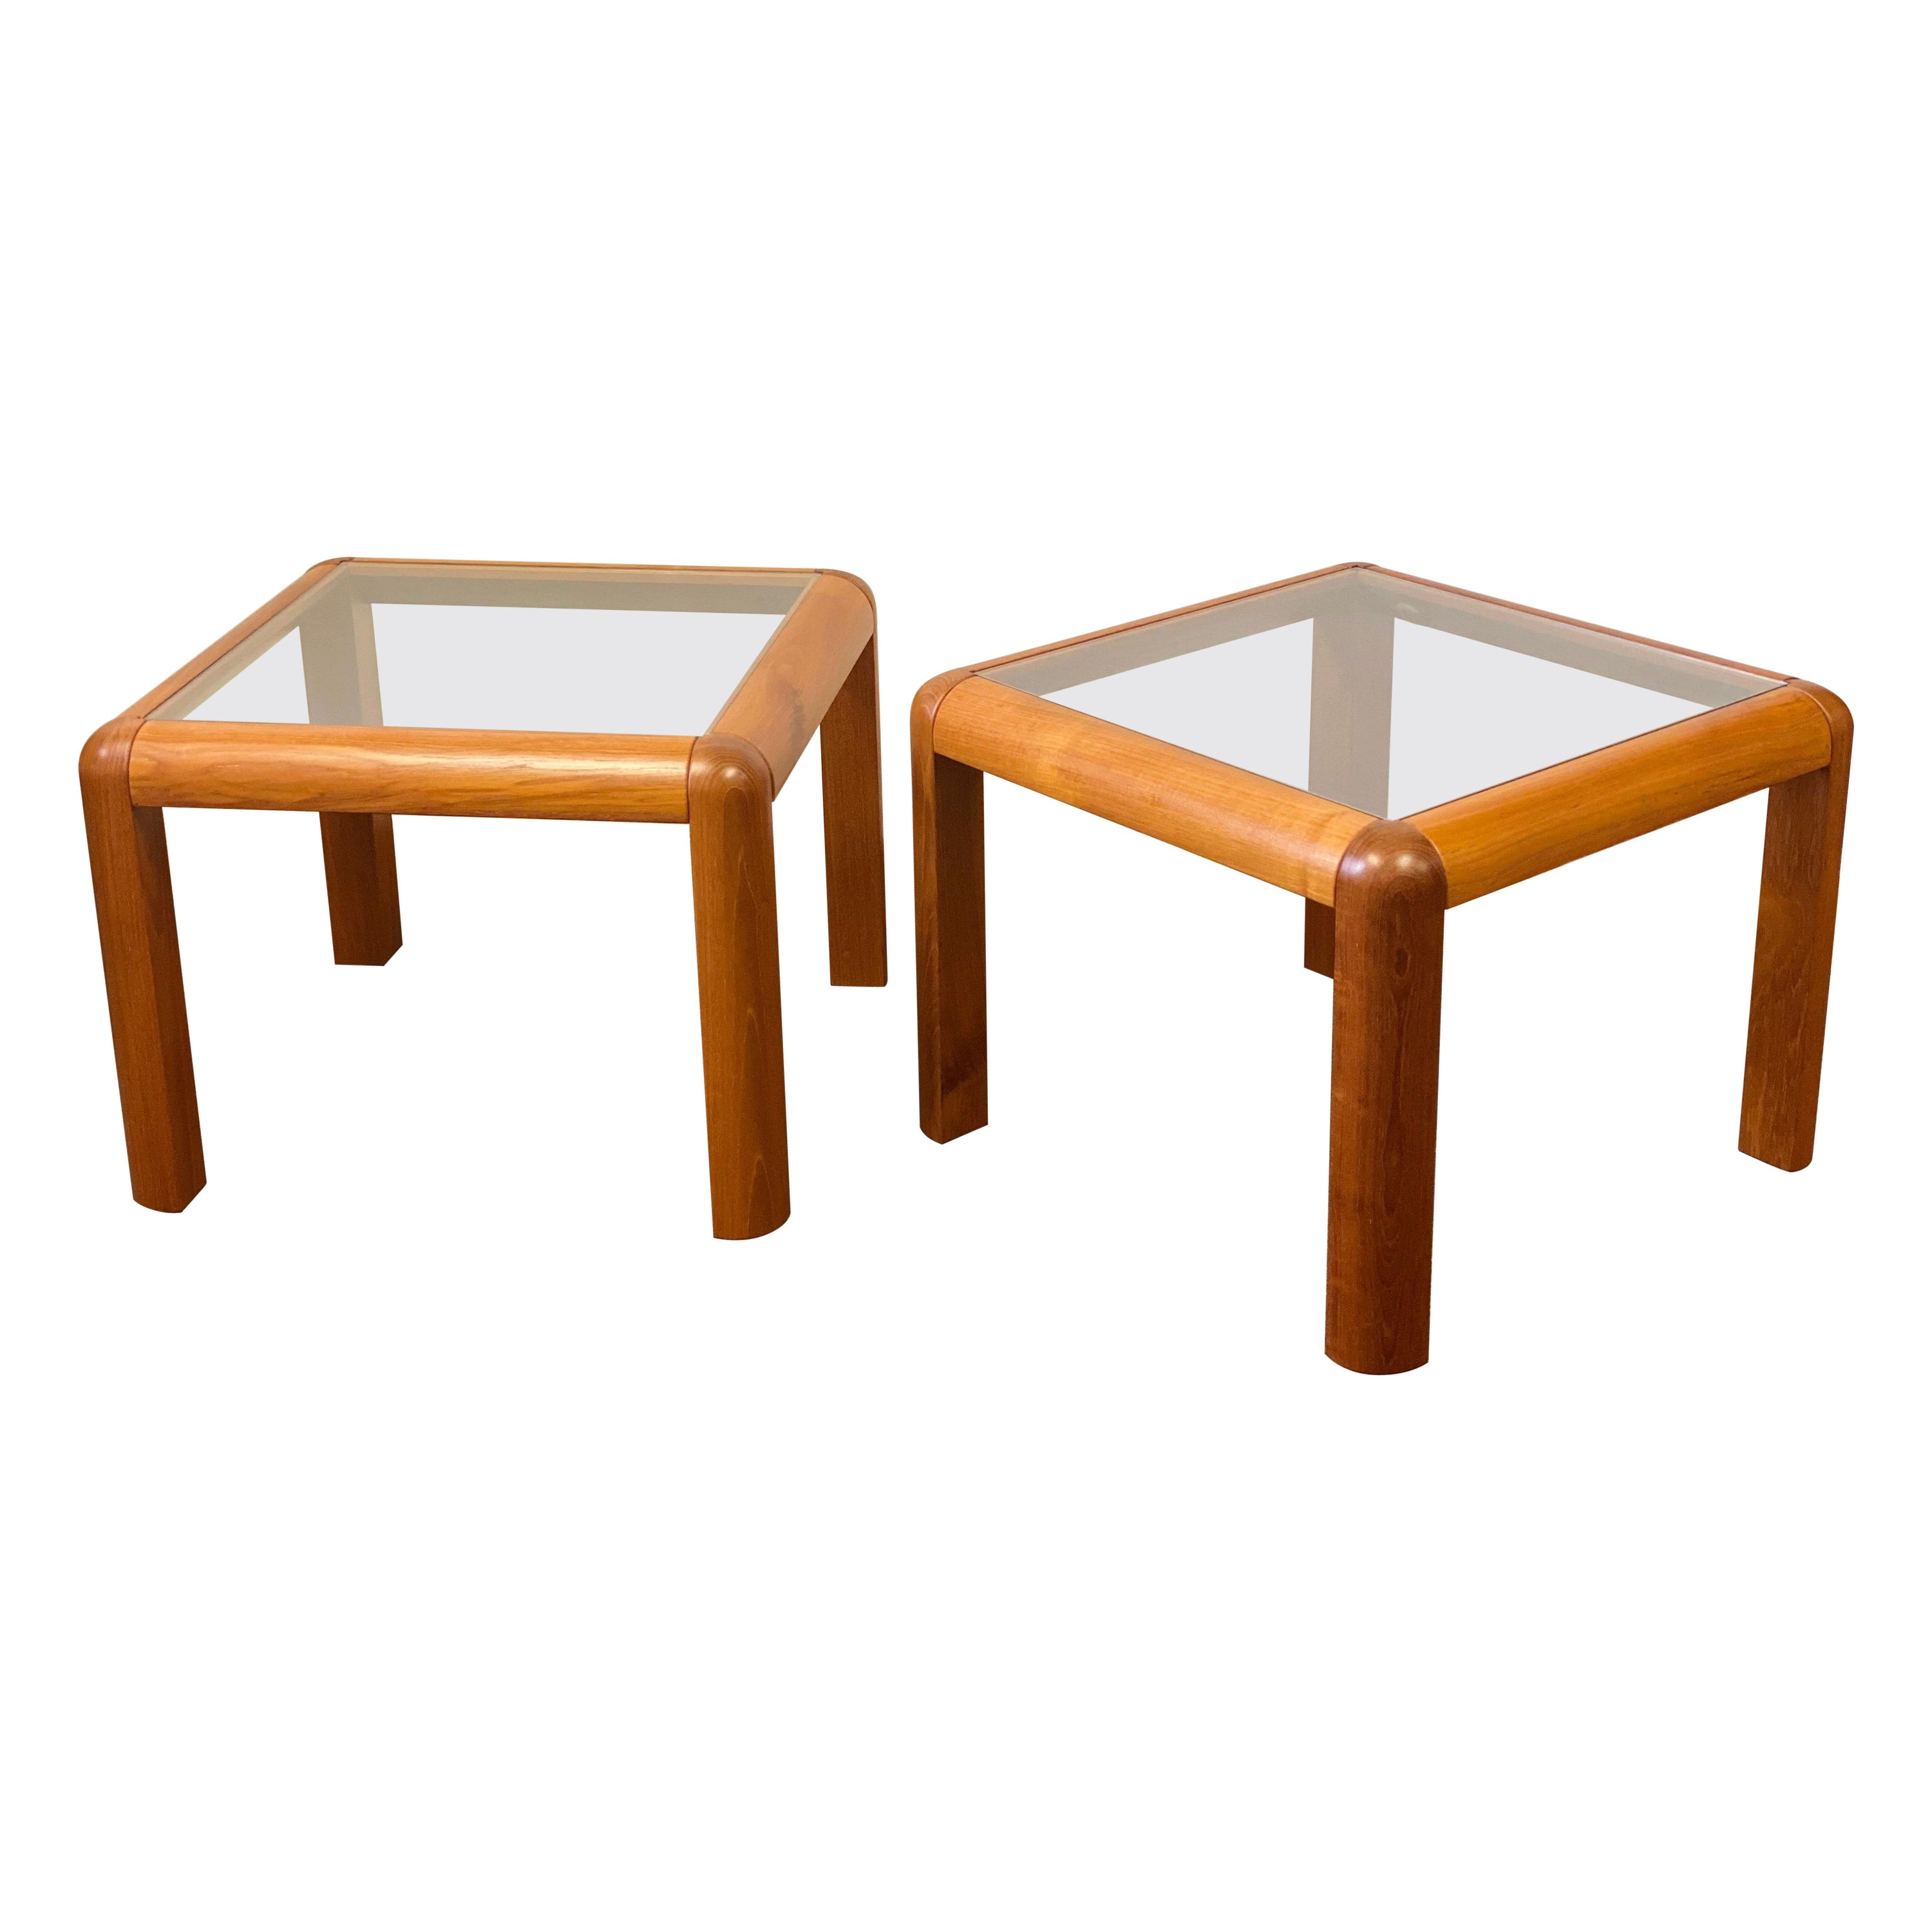 1960s Danish Trioh-Mobler Teak and Glass Square Side Tables, a Pair For Sale